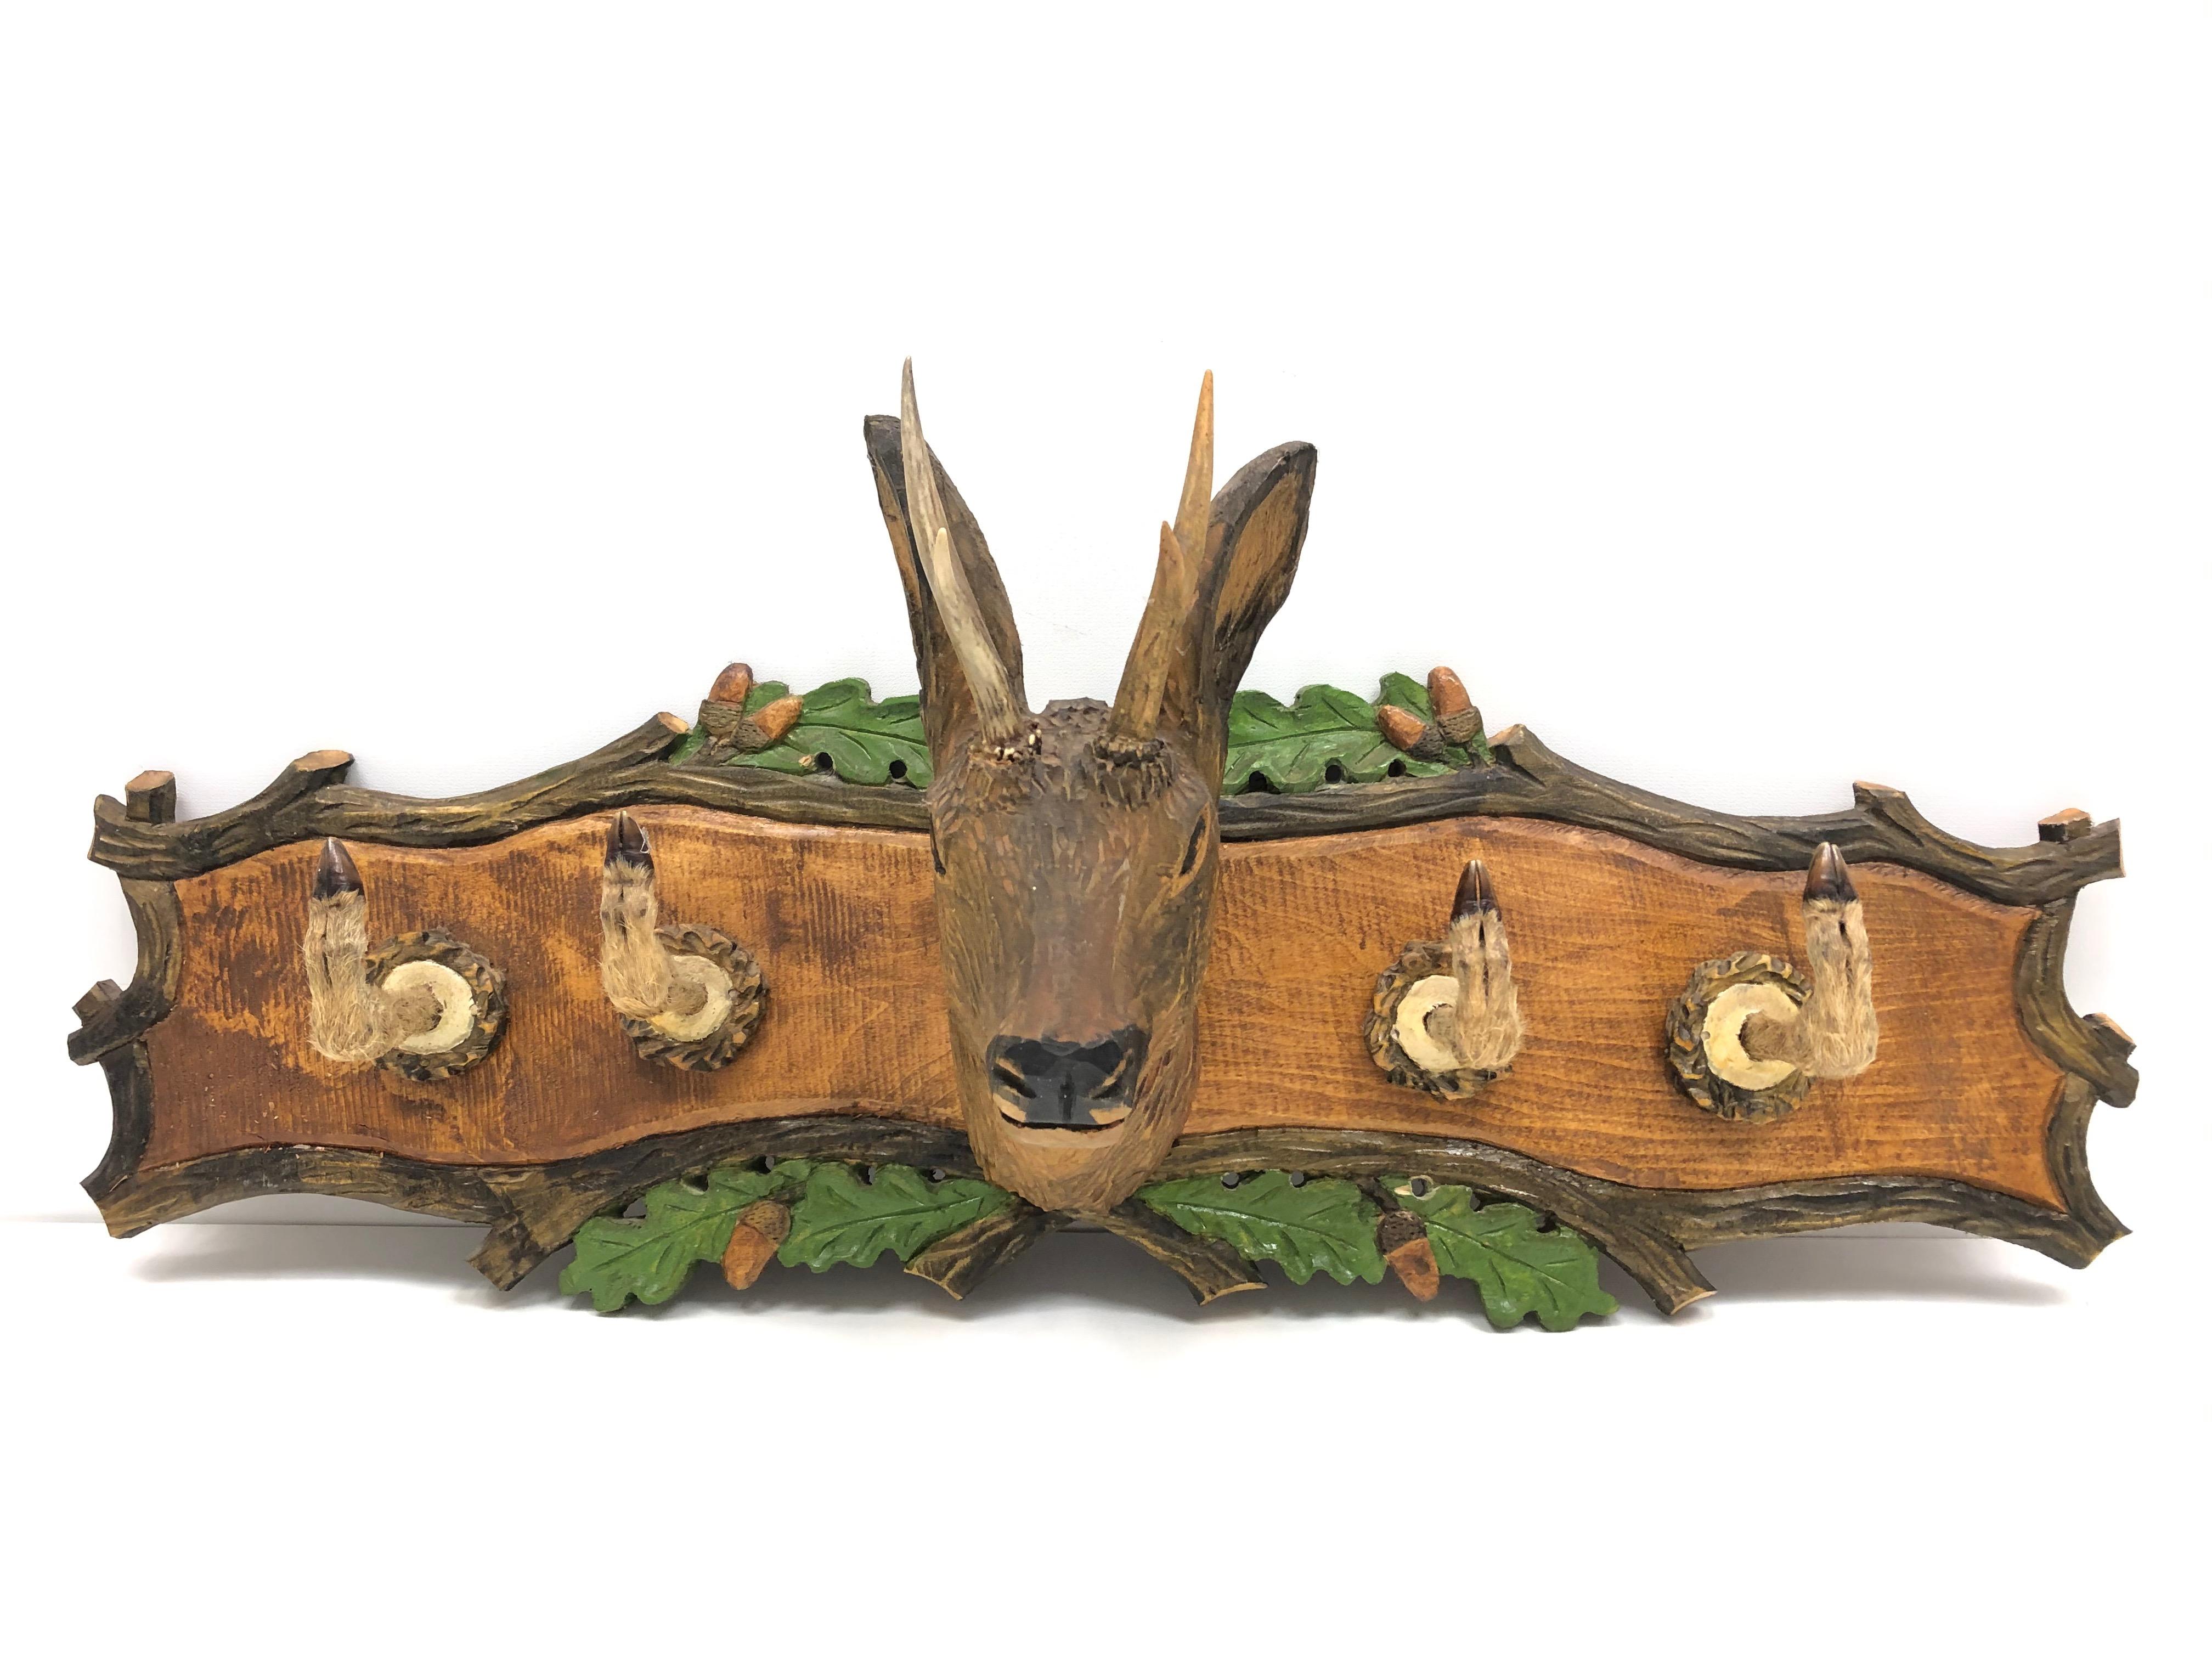 A beautiful whimsical 20th century German Black Forest carved head hat or coat rack with a small roe deer wood carved head, with four roe deer legs as hooks, mounted to a carved back with oak leaves. Nice addition to a hunters loge or just a man